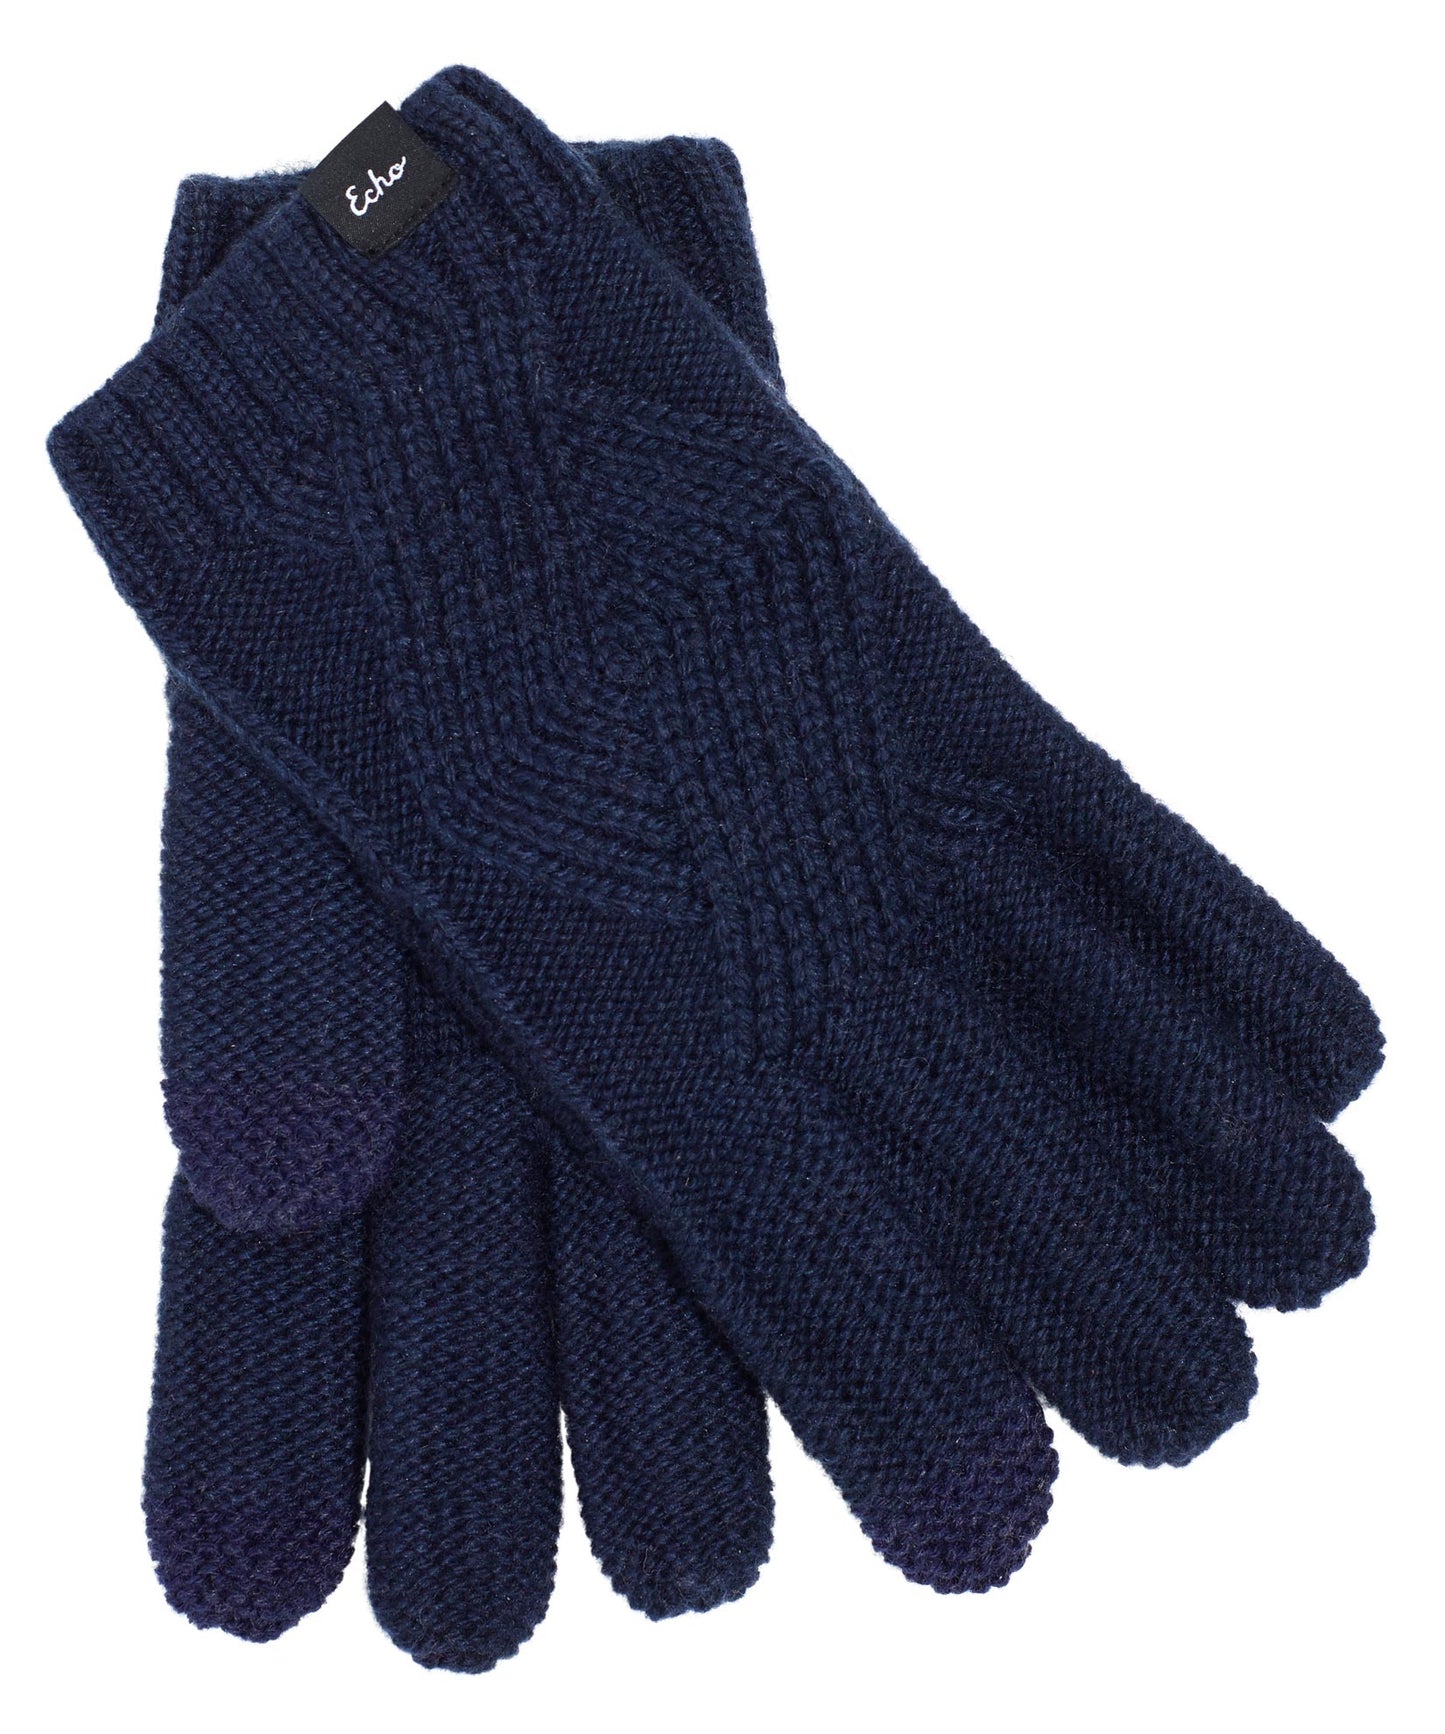 Recycled Cable Glove in color Navy